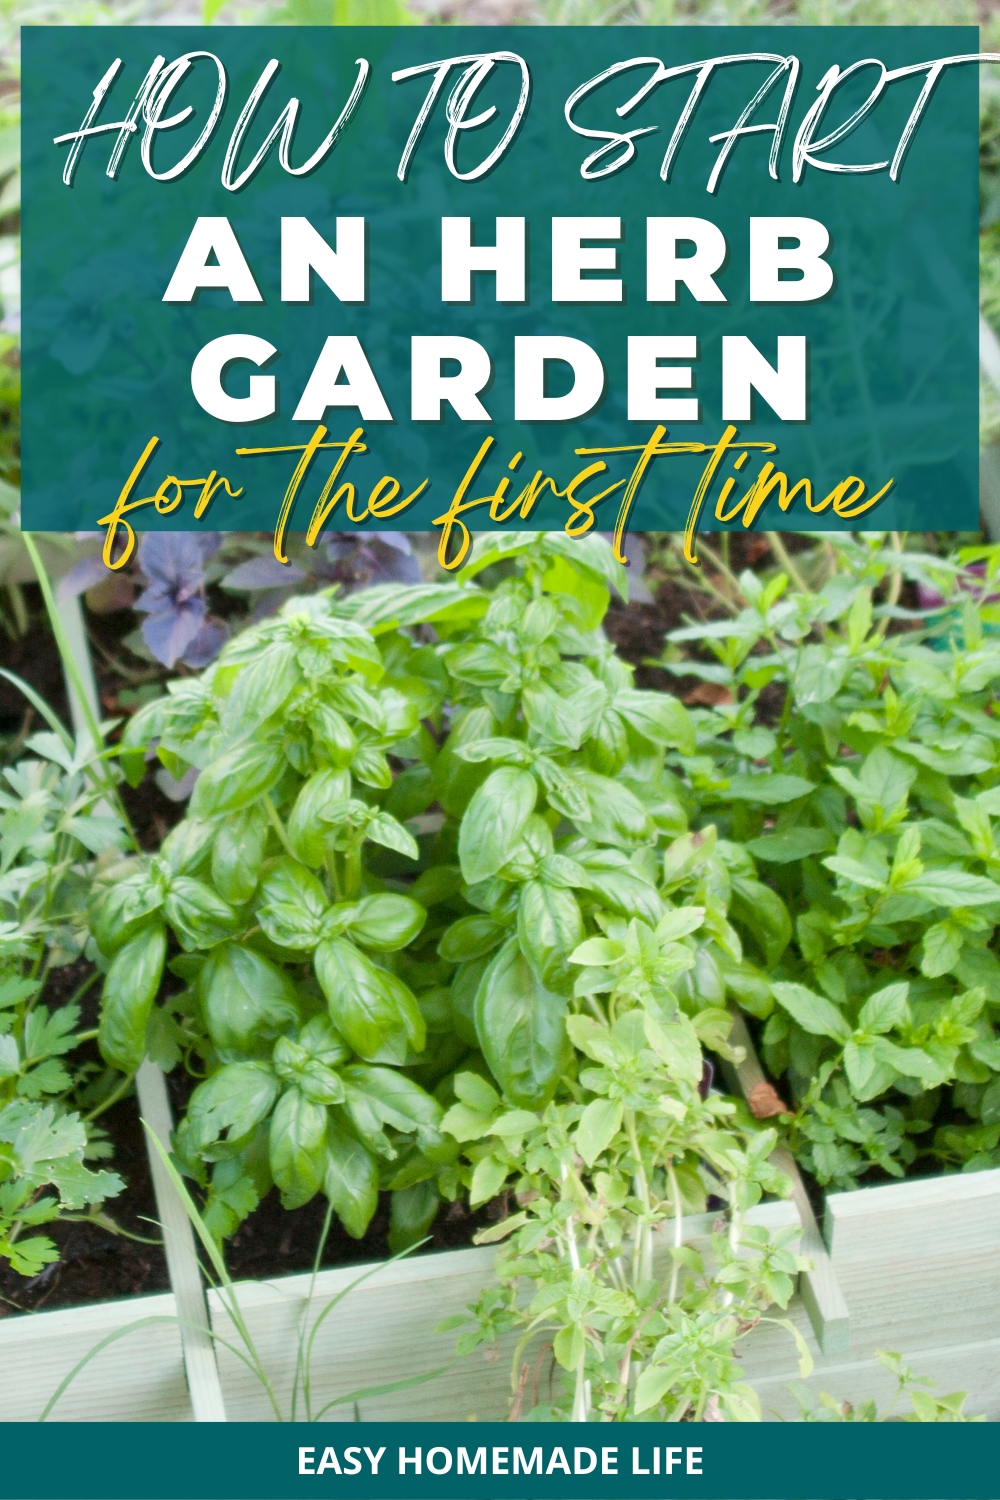 How to start an herb garden for the first time.